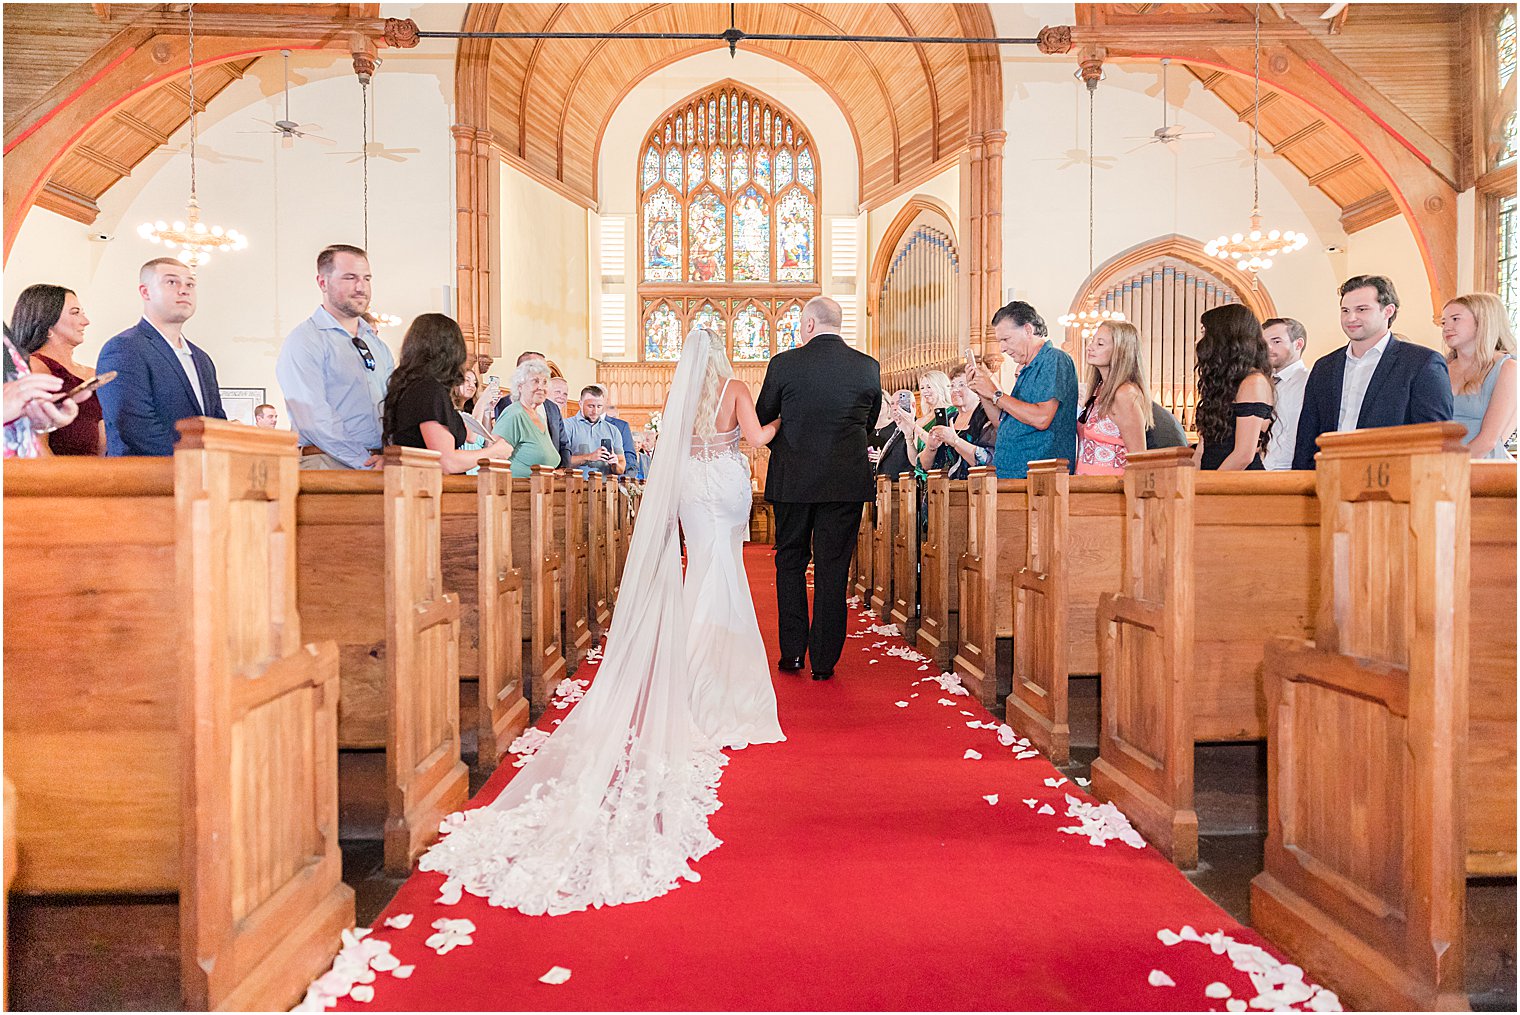 bride walks down aisle on red carpet with father during traditional church wedding in New Jersey